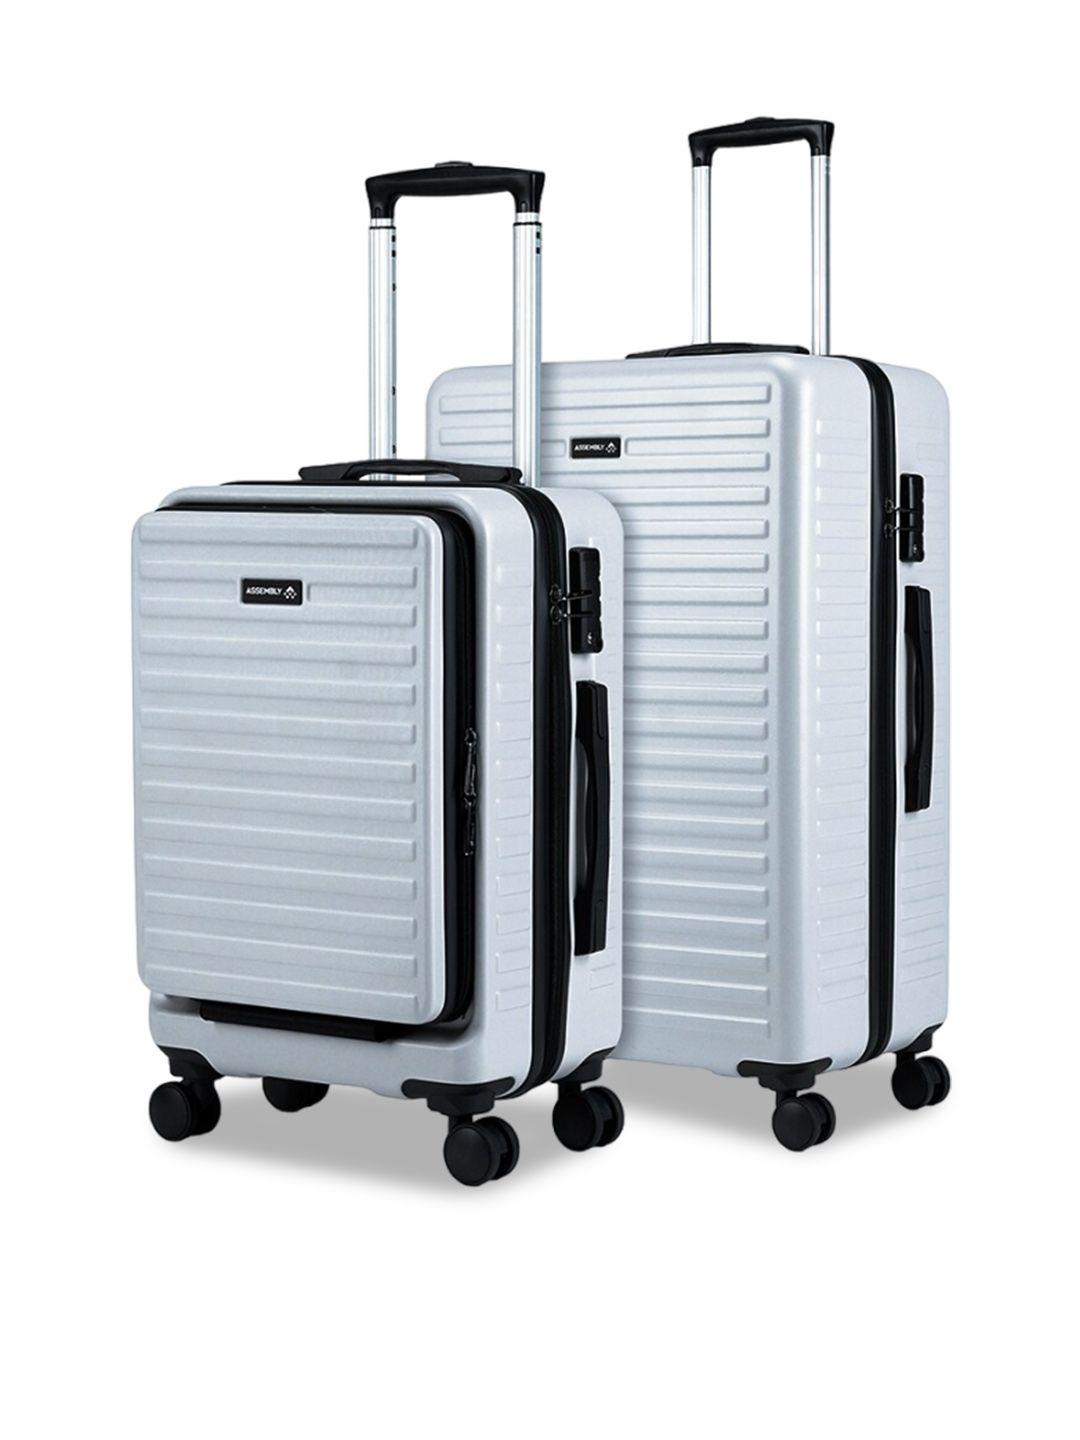 assembly set of 2 textured hard-sided suitcase